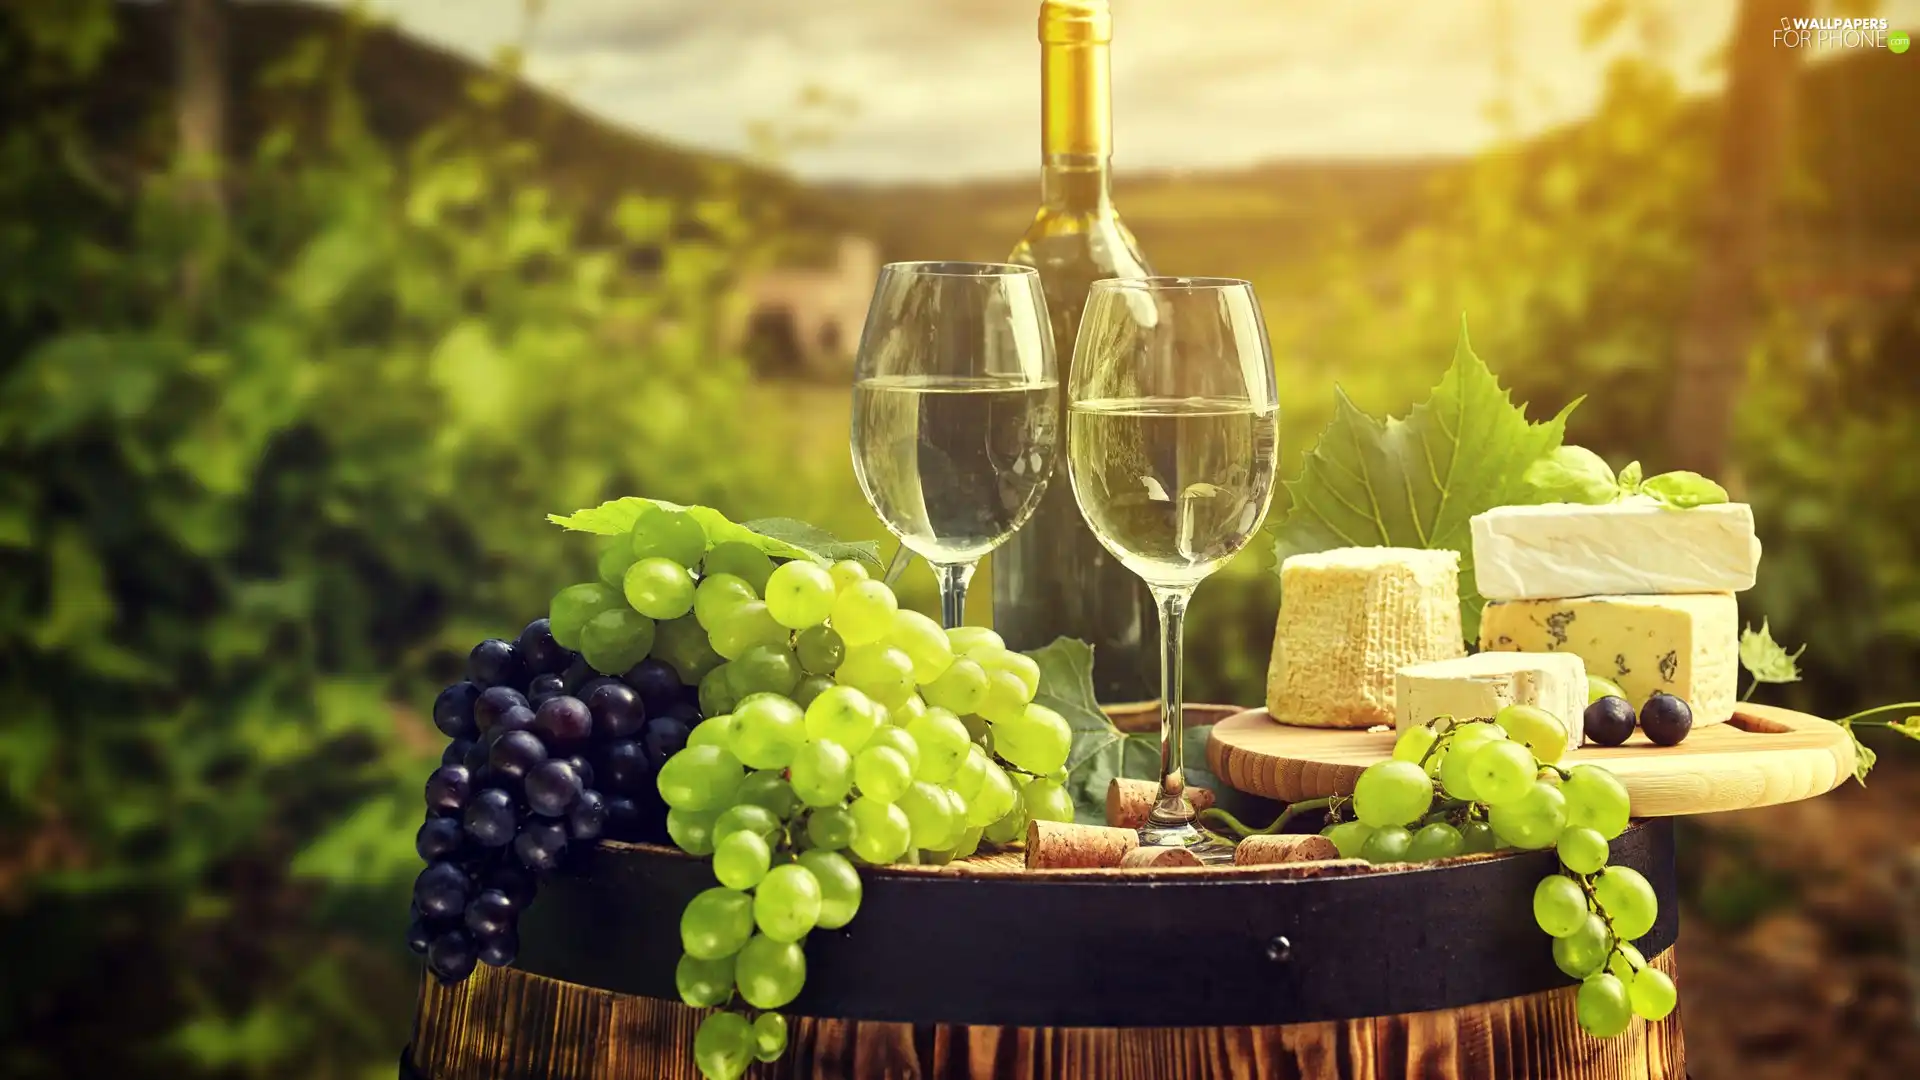 Bottle, Two cars, Cheese, glasses, Wine, Grapes, barrel